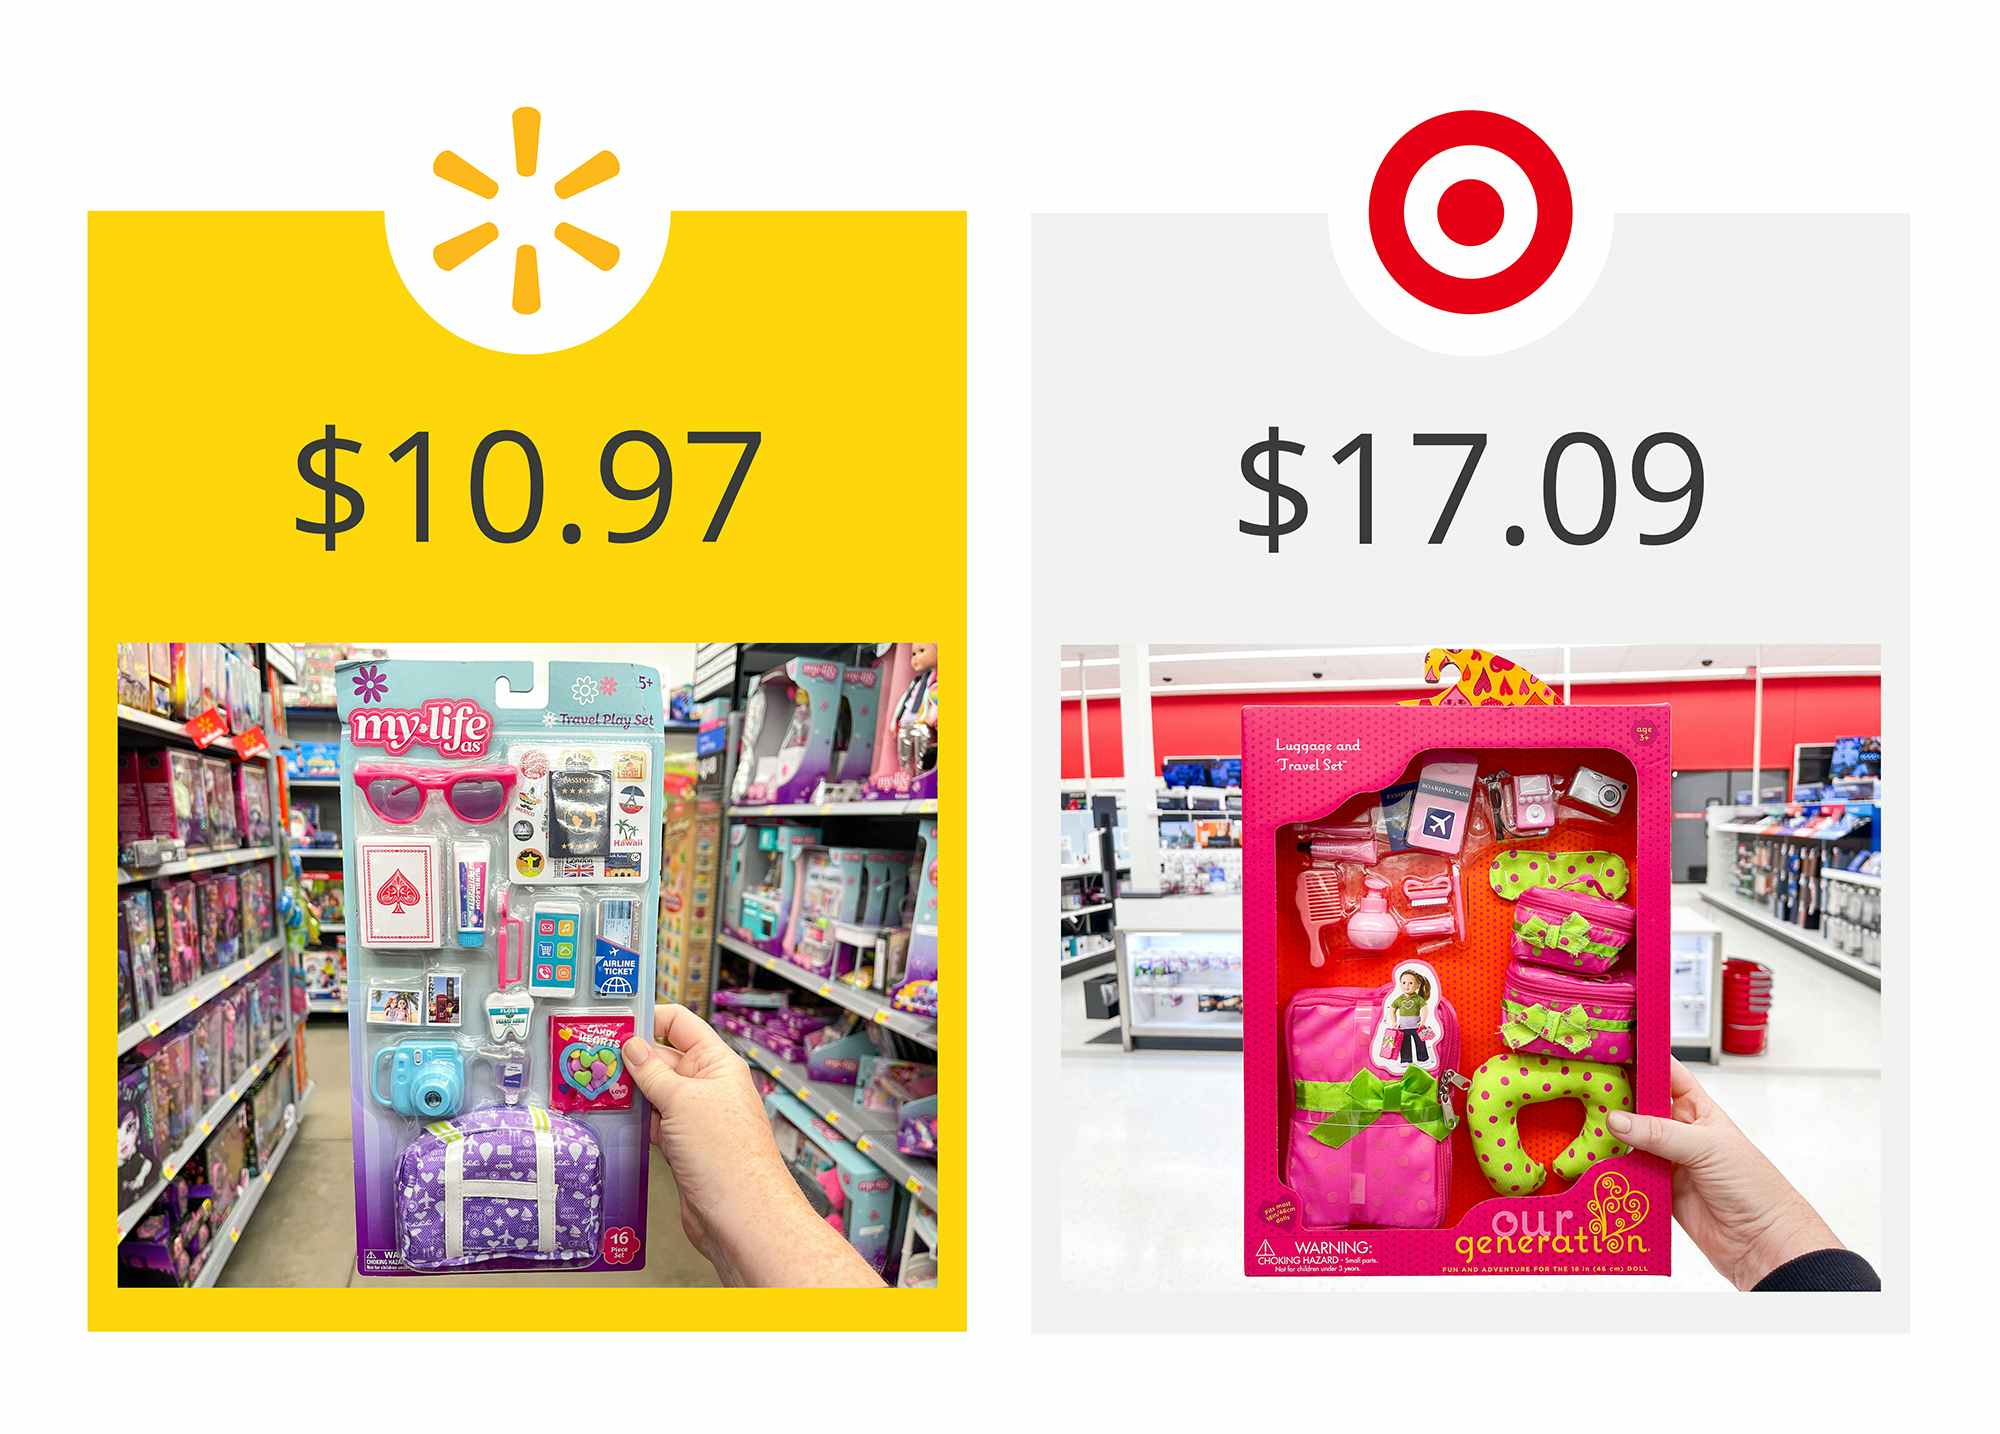 walmart as the winner on a graphic showing price comparison between target's our generation and walmart's my life as doll luggage and travel sets